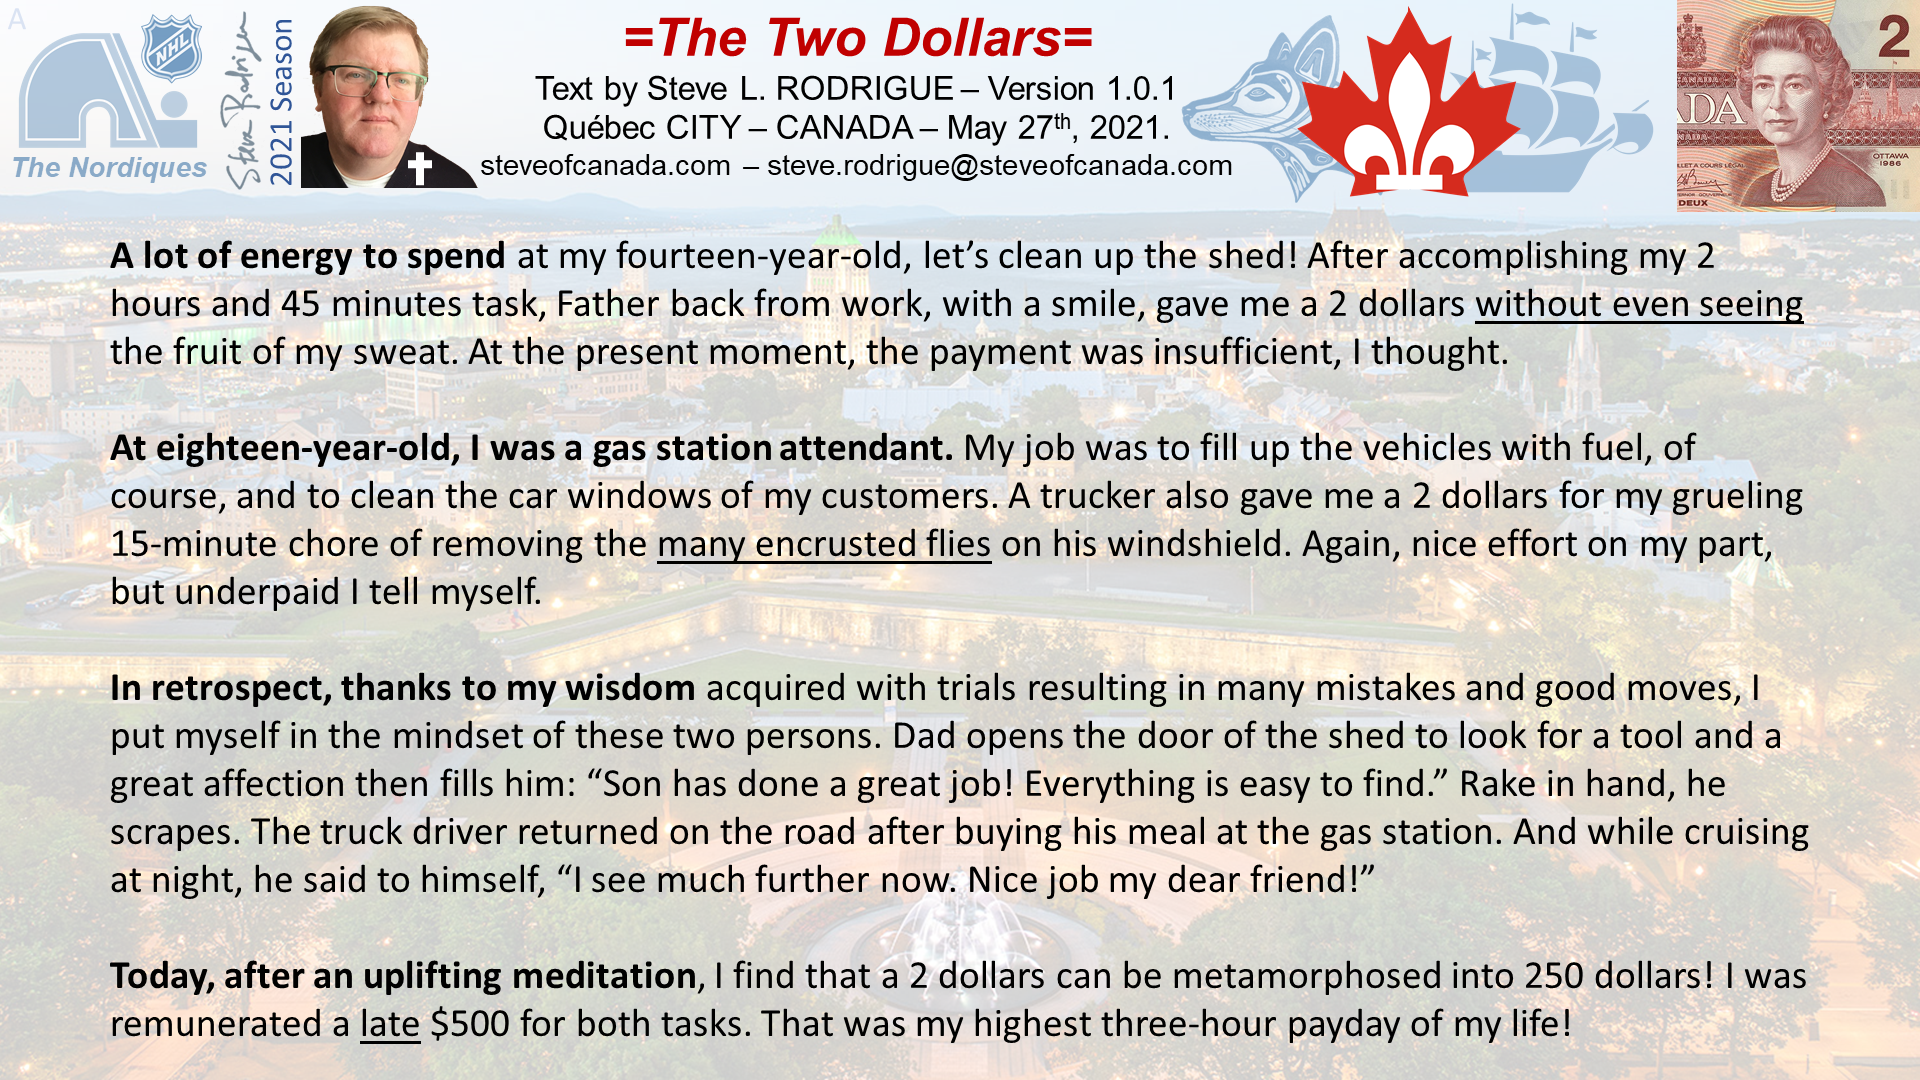 The Two Dollars